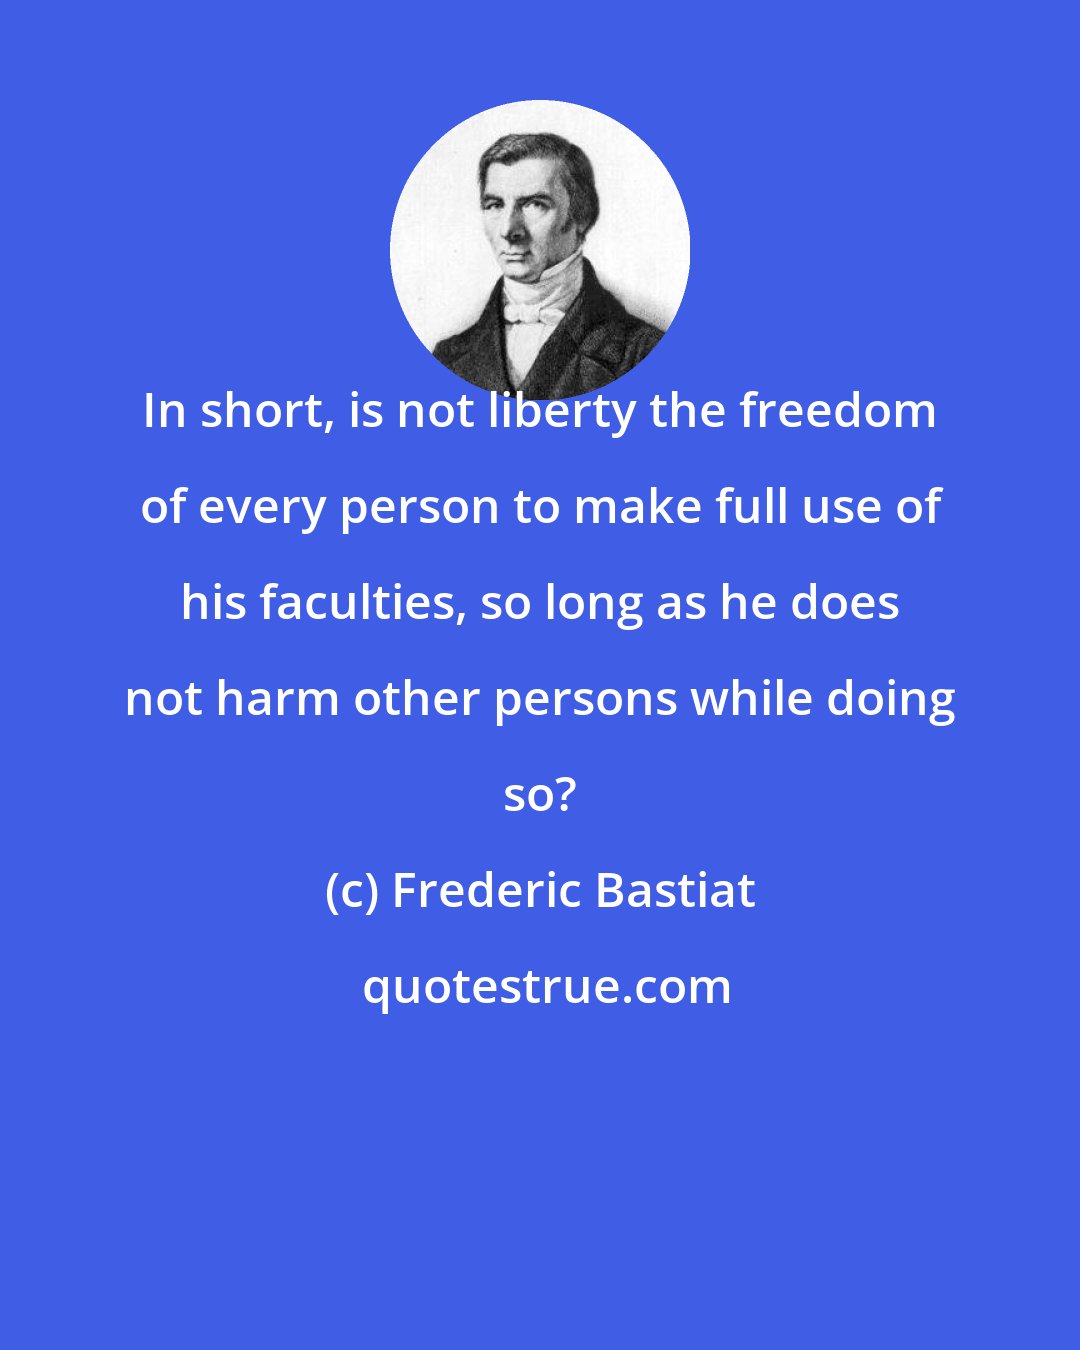 Frederic Bastiat: In short, is not liberty the freedom of every person to make full use of his faculties, so long as he does not harm other persons while doing so?